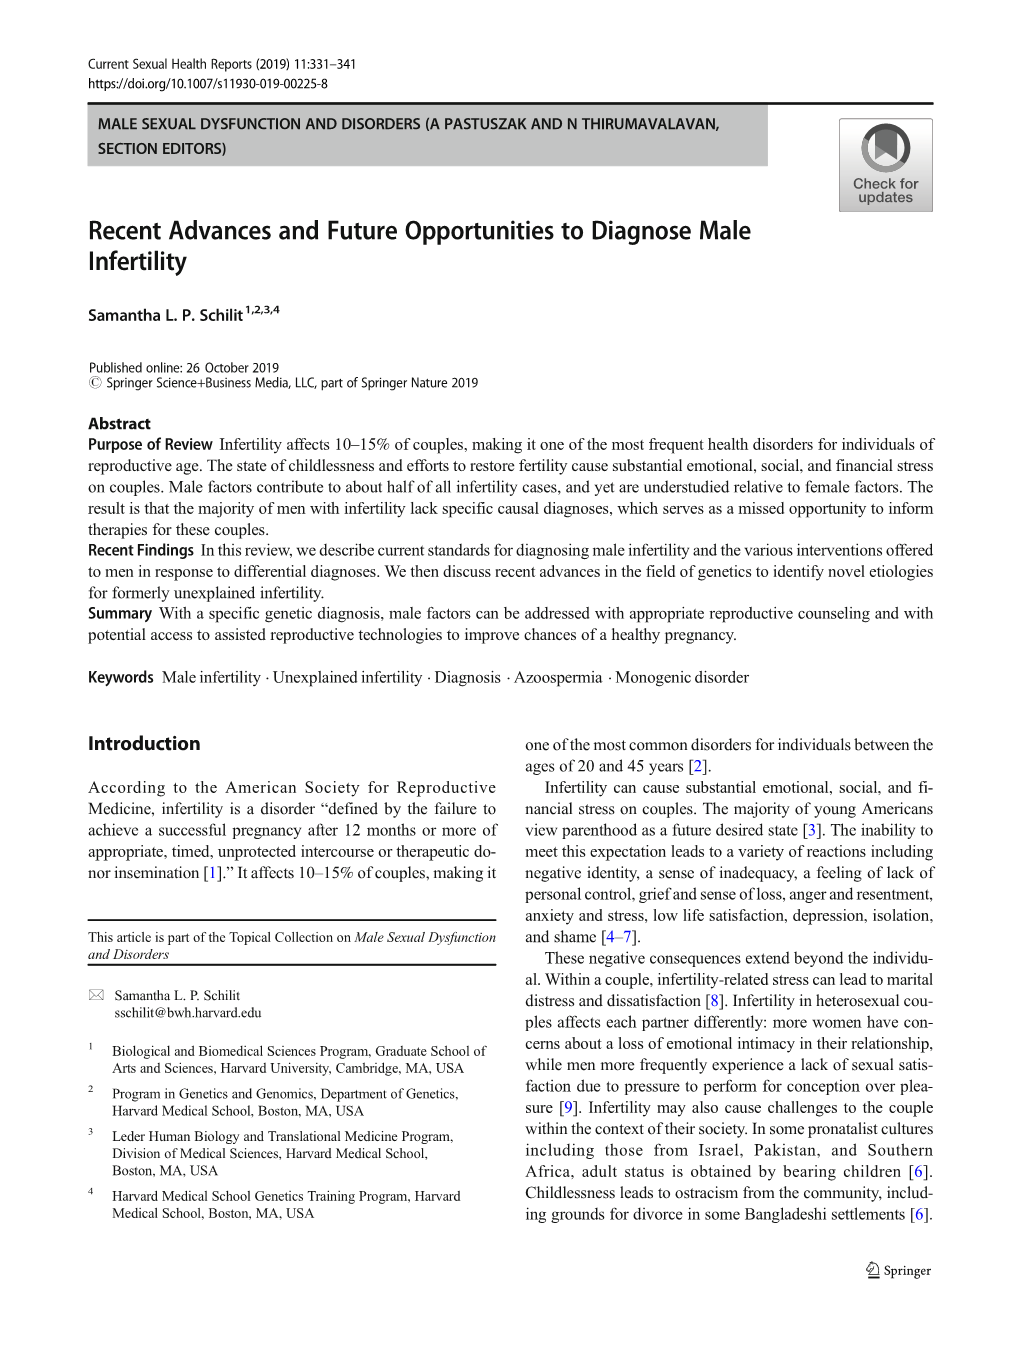 Recent Advances and Future Opportunities to Diagnose Male Infertility